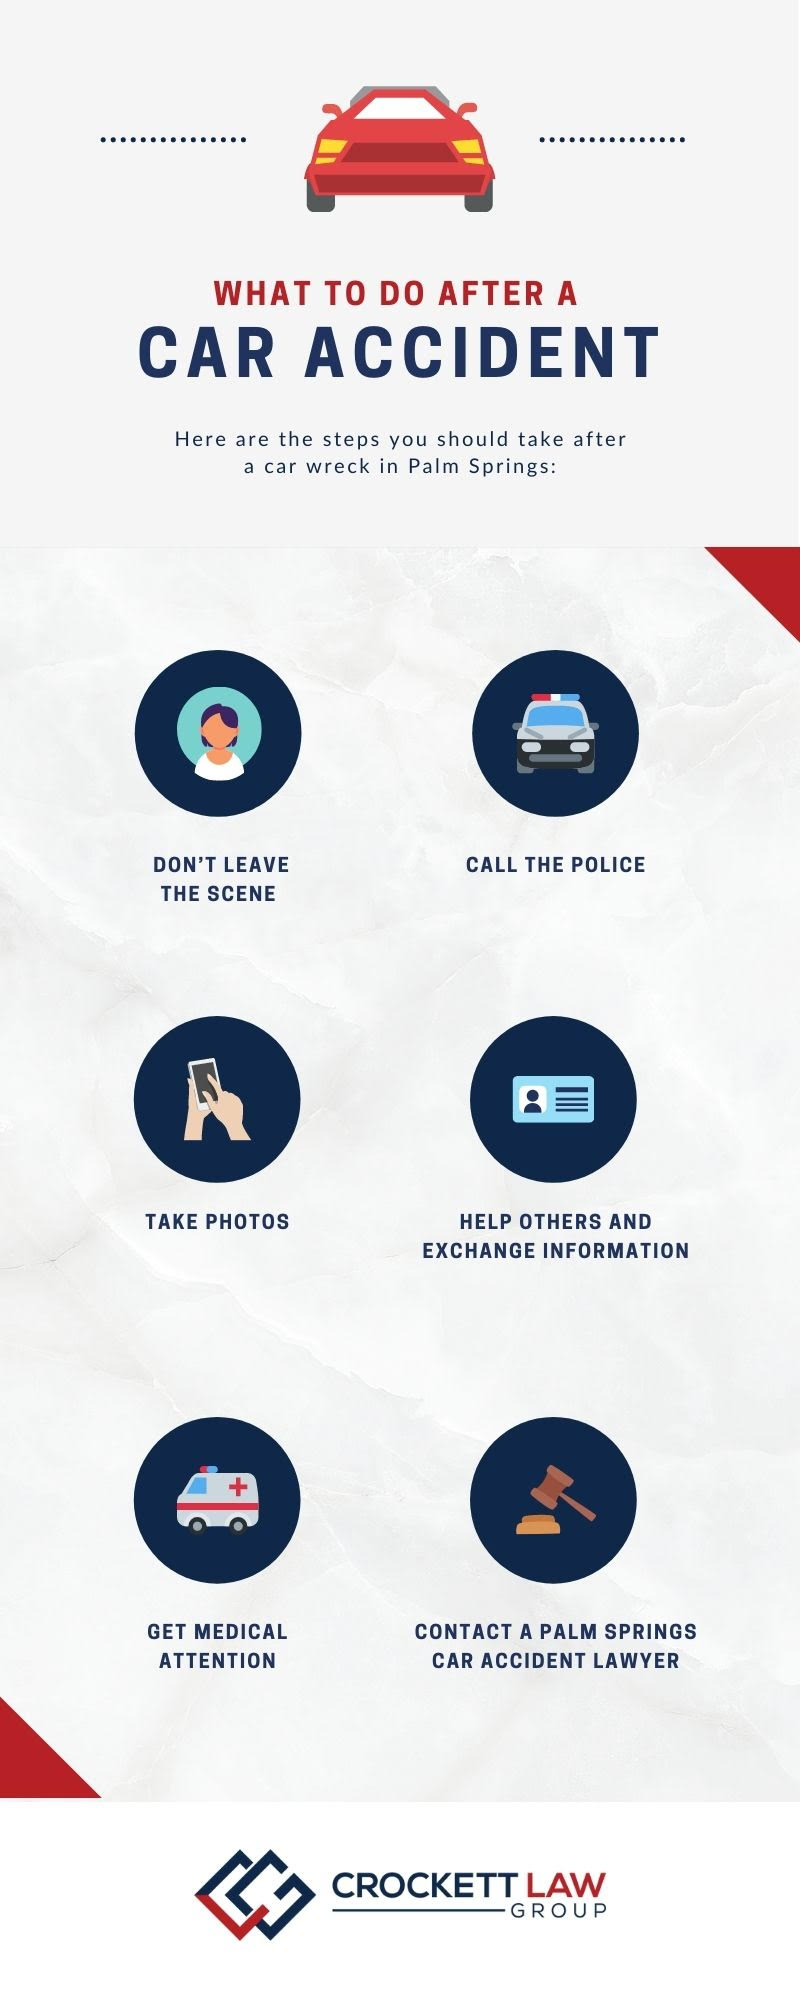 Palm Spring Car Accident Lawyer On What To Do After A Car Crash Infographic